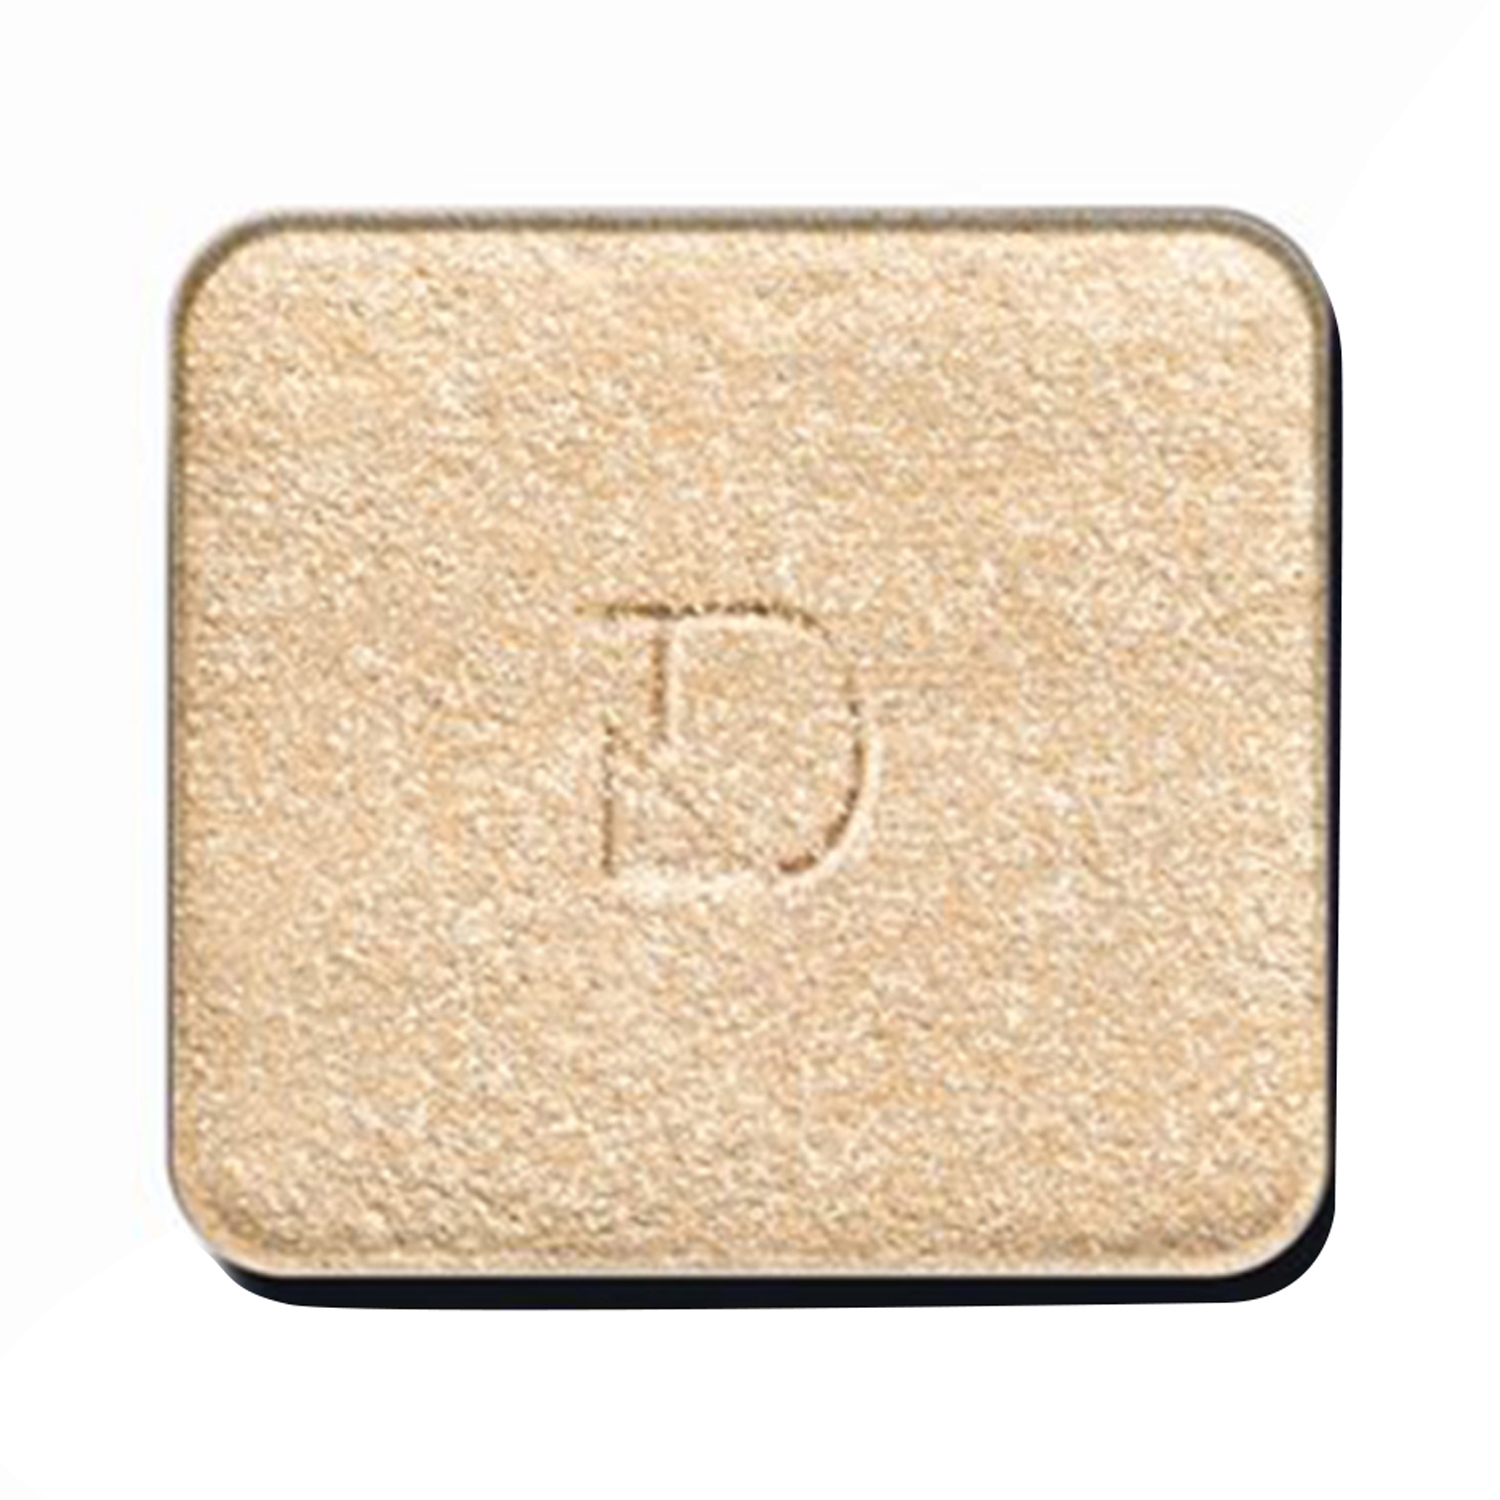 Diego Dalla Palma Milano | Diego Dalla Palma Milano Pearly Eyeshadow - Light Champagne (2g)